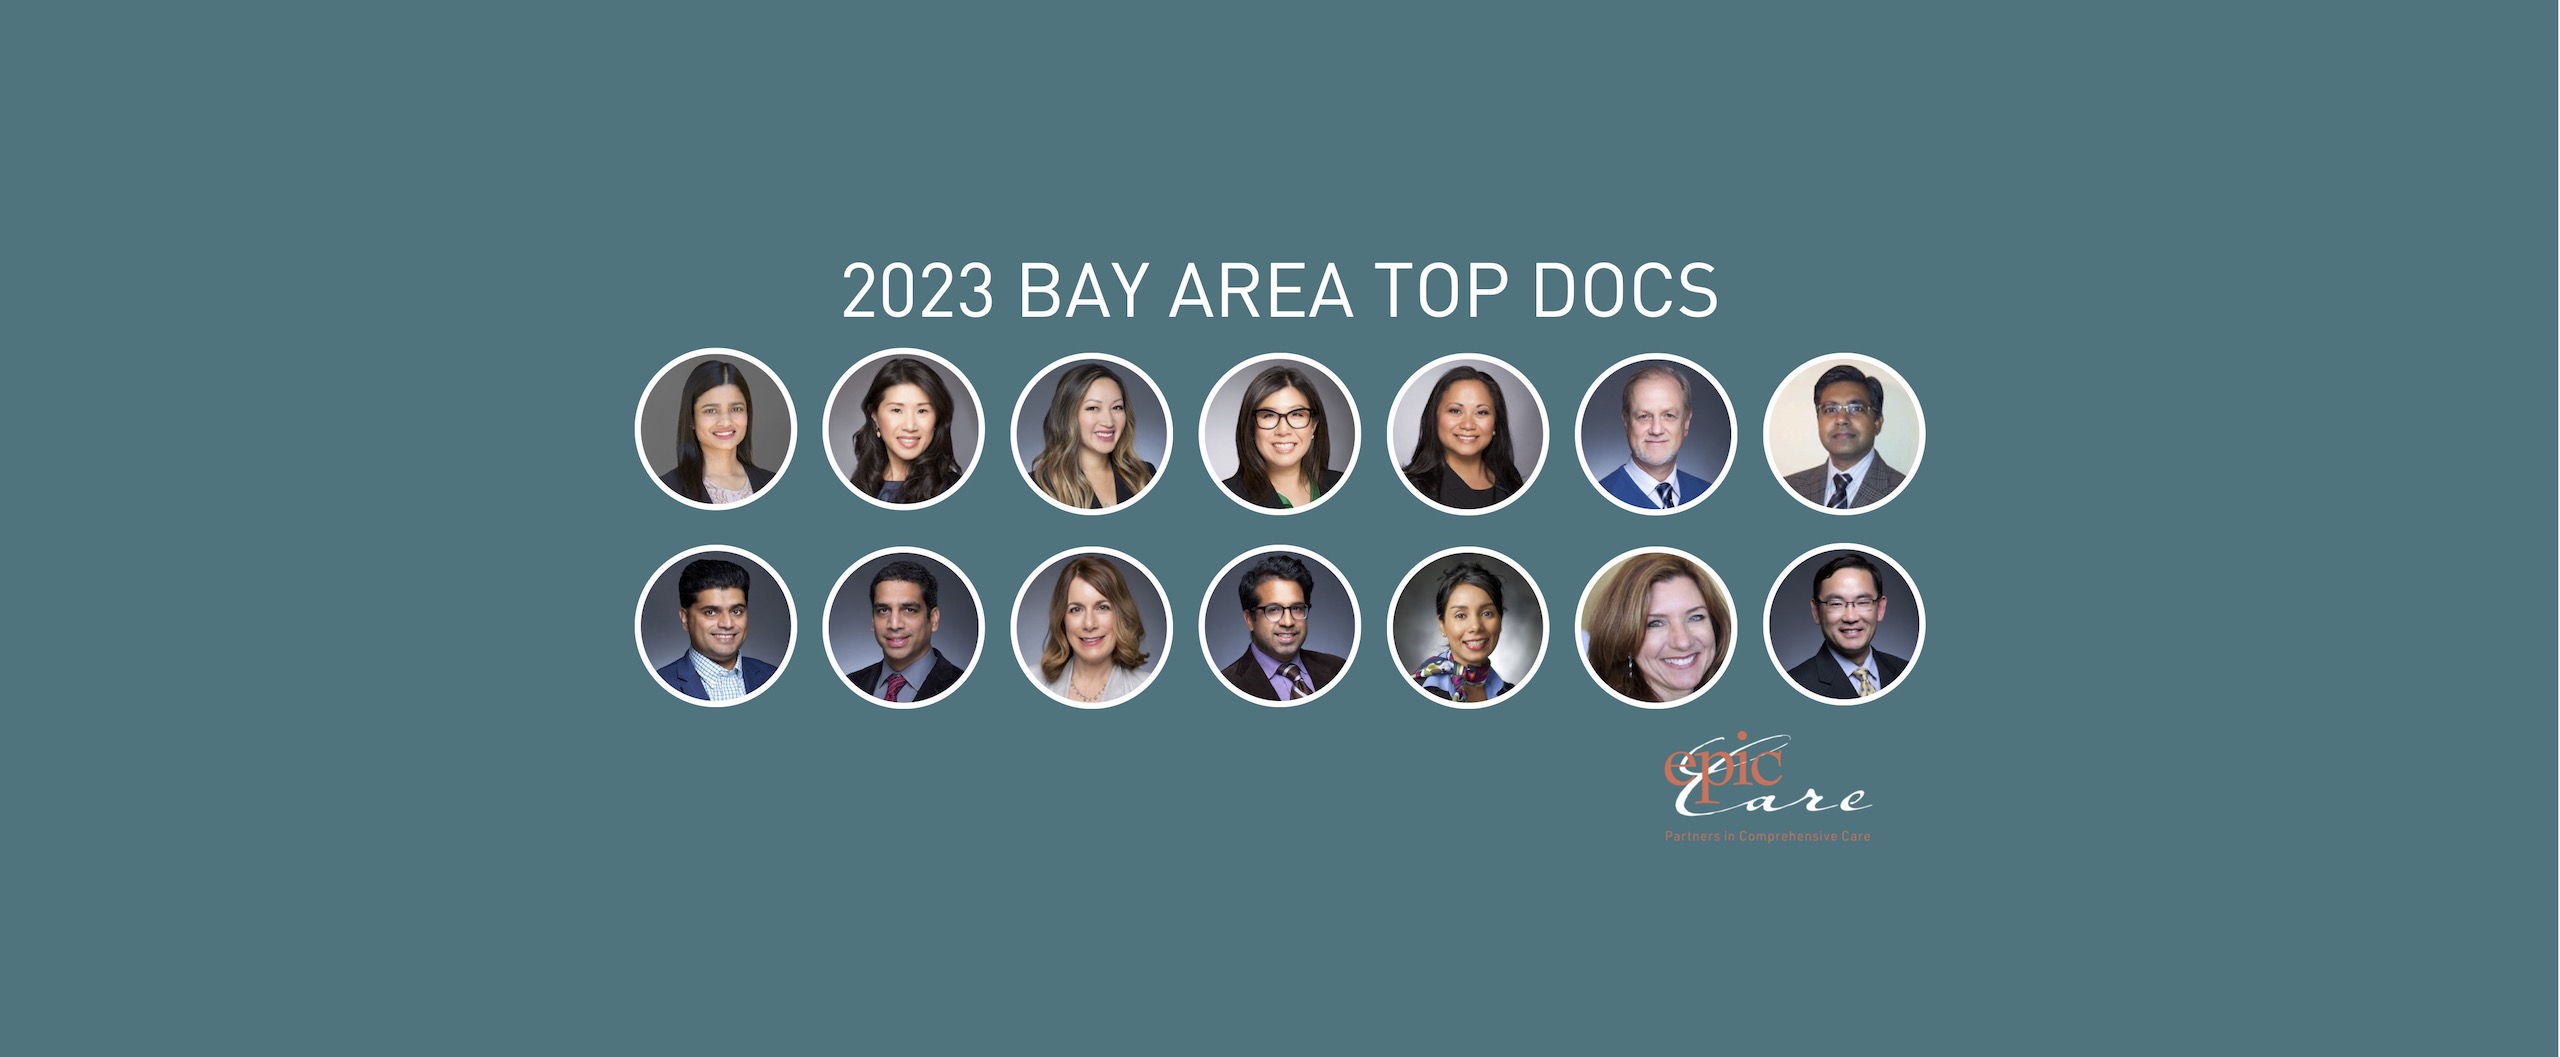 Epic Care Physicians Named 2023 Bay Area Top Docs!